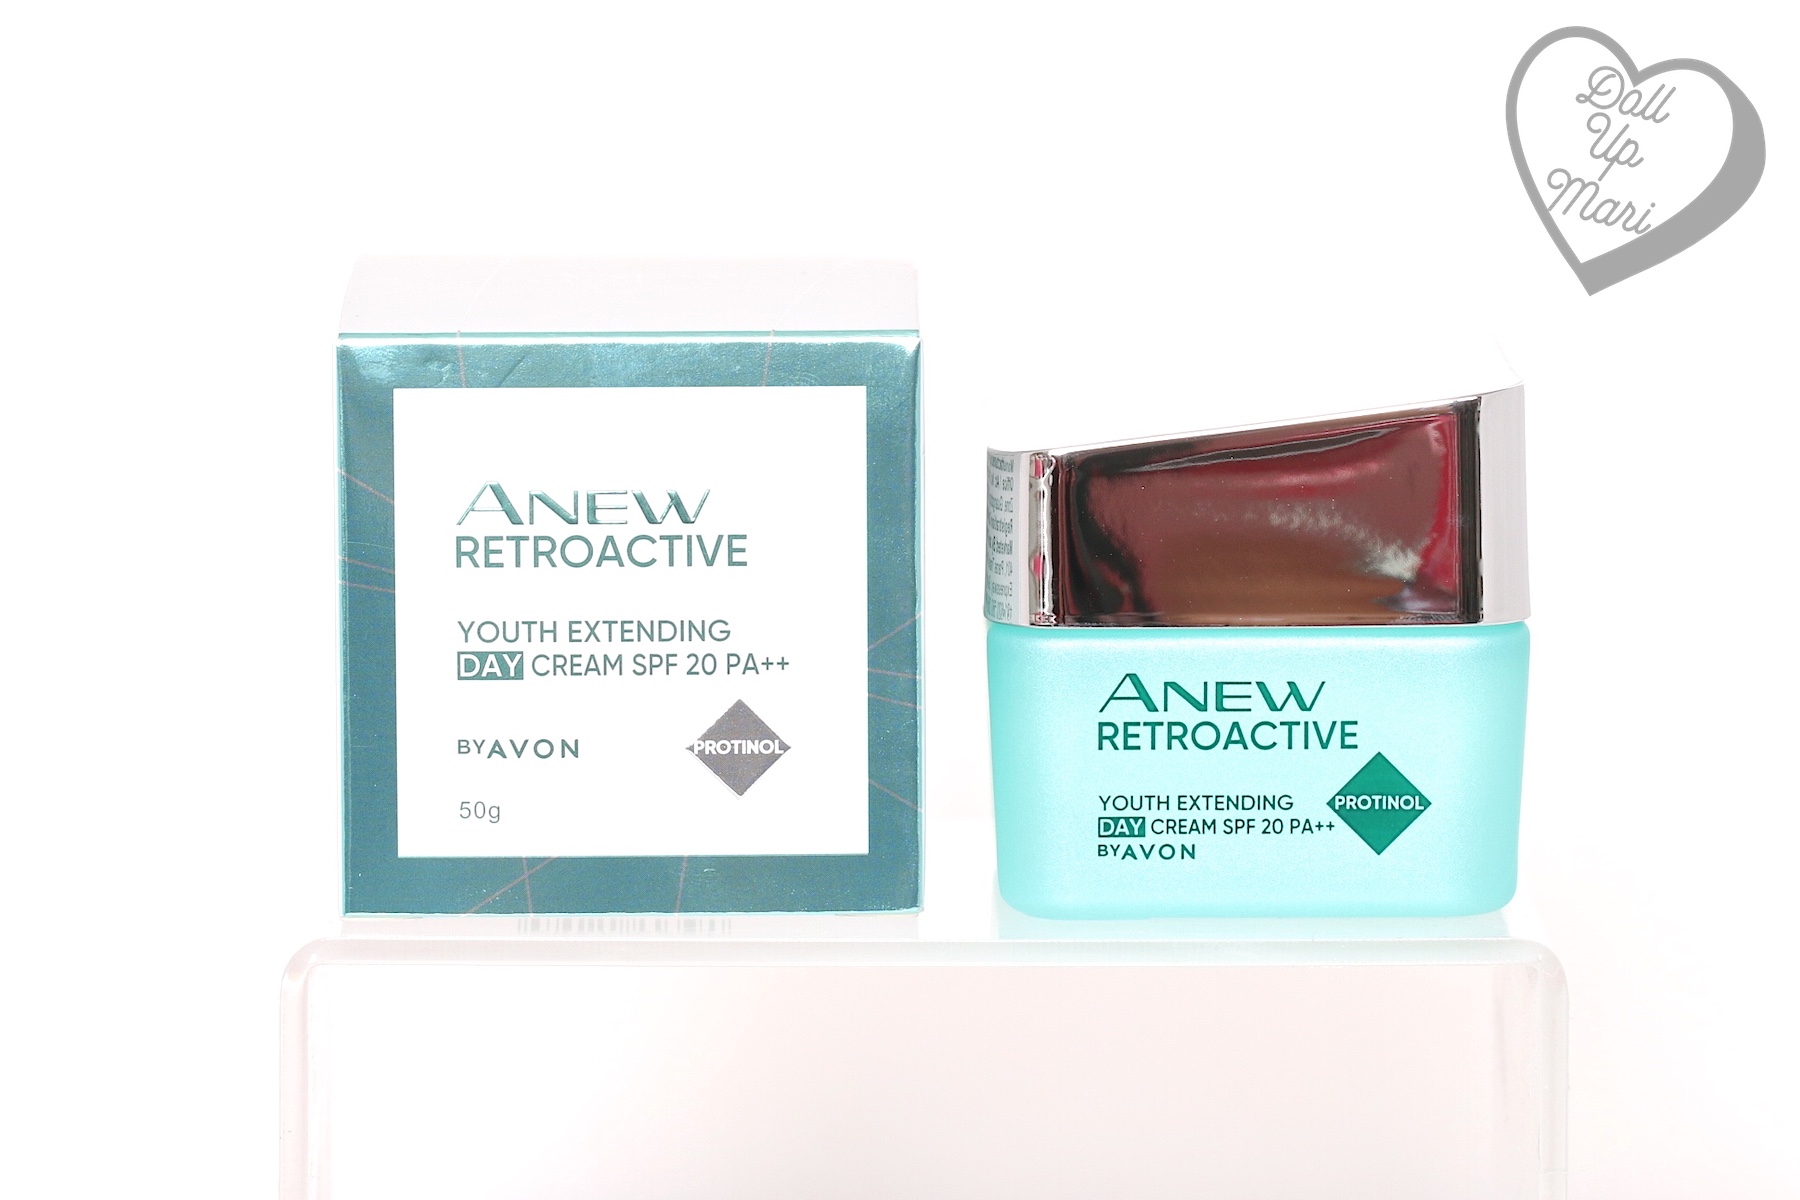 AVON ANEW Retroactive Youth Extending Day Cream SPF20 PA++